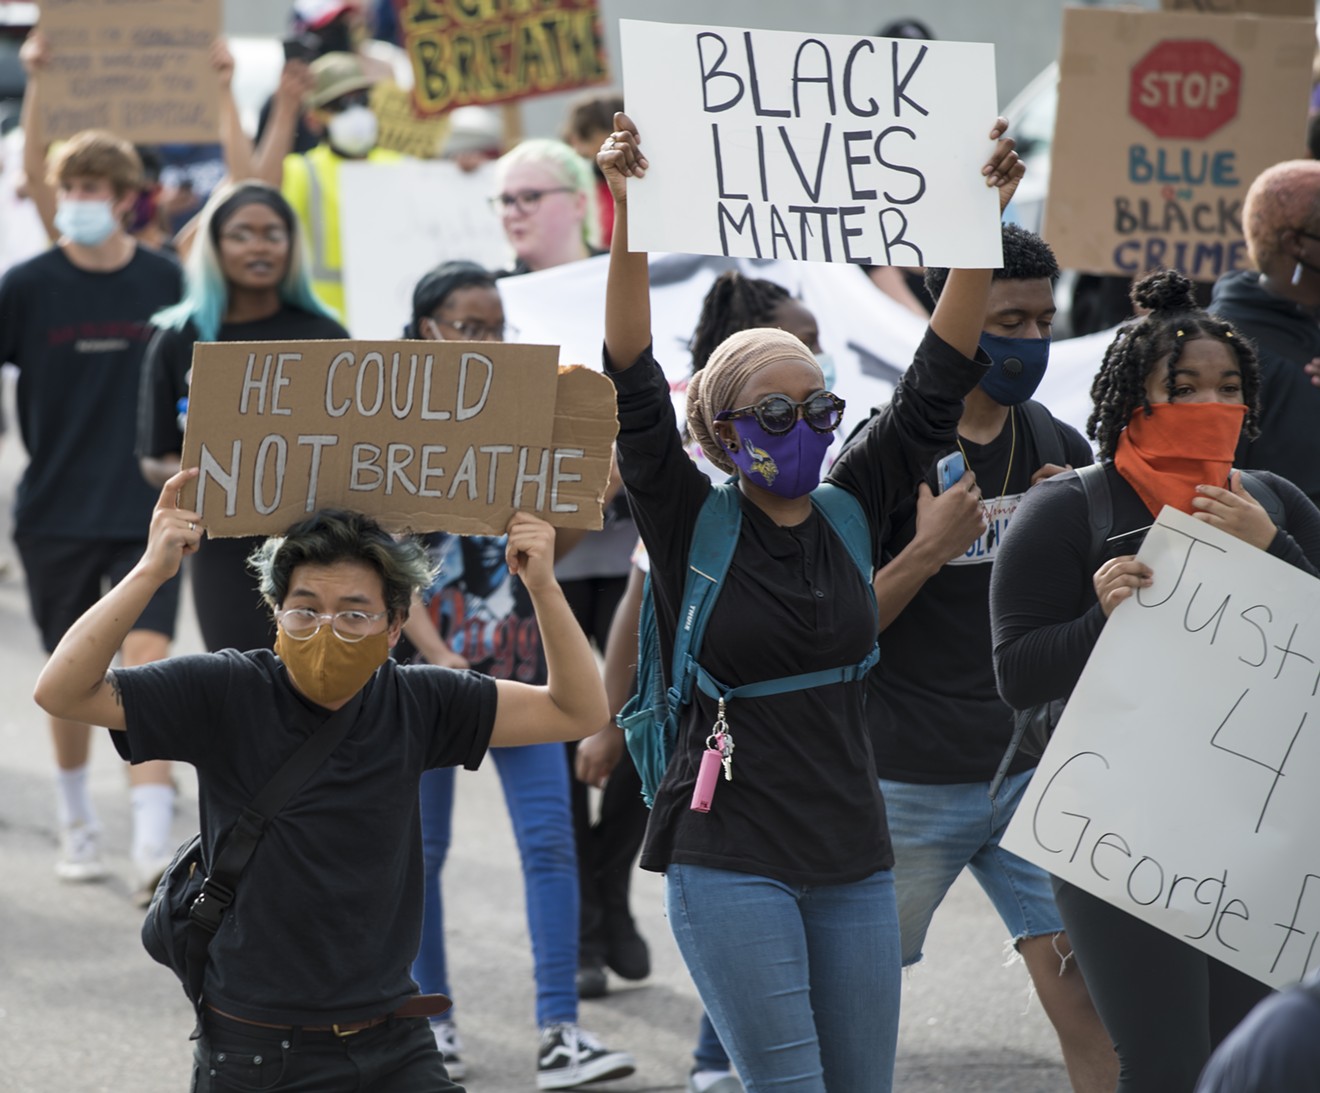 Minneapolis took to the streets to protest the police killing of George Floyd.